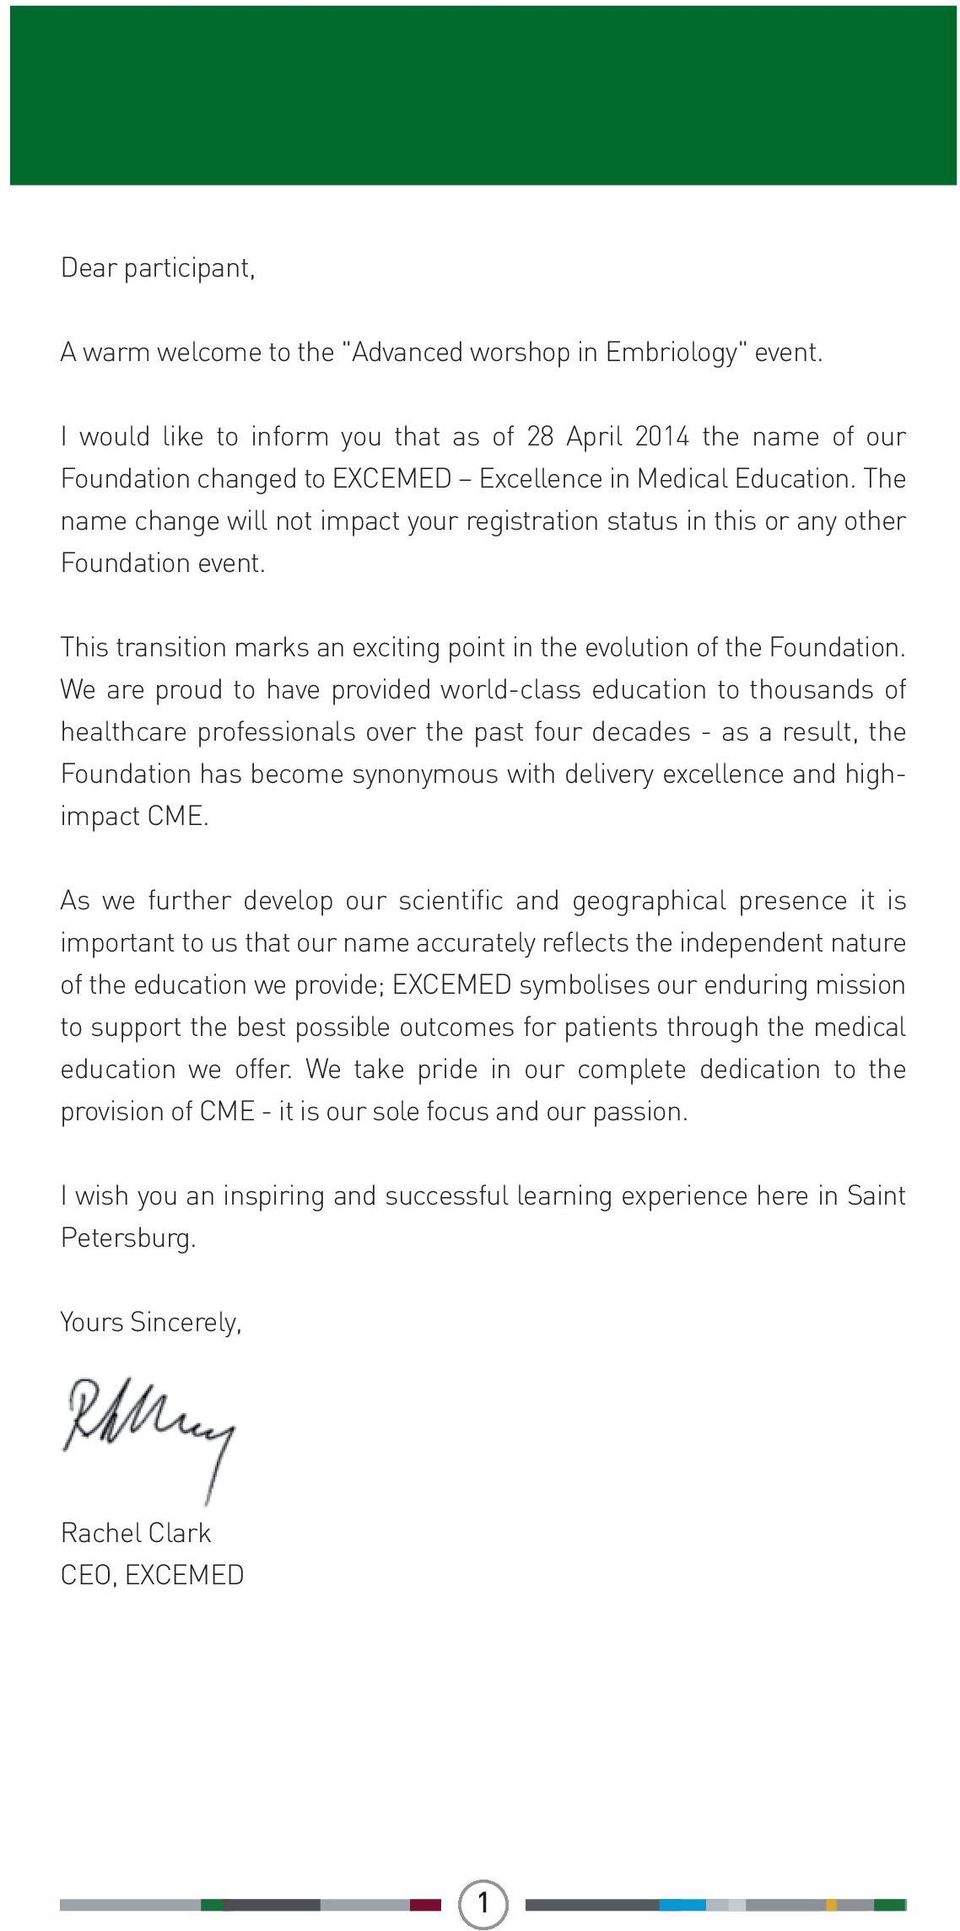 The name change will not impact your registration status in this or any other Foundation event. This transition marks an exciting point in the evolution of the Foundation.